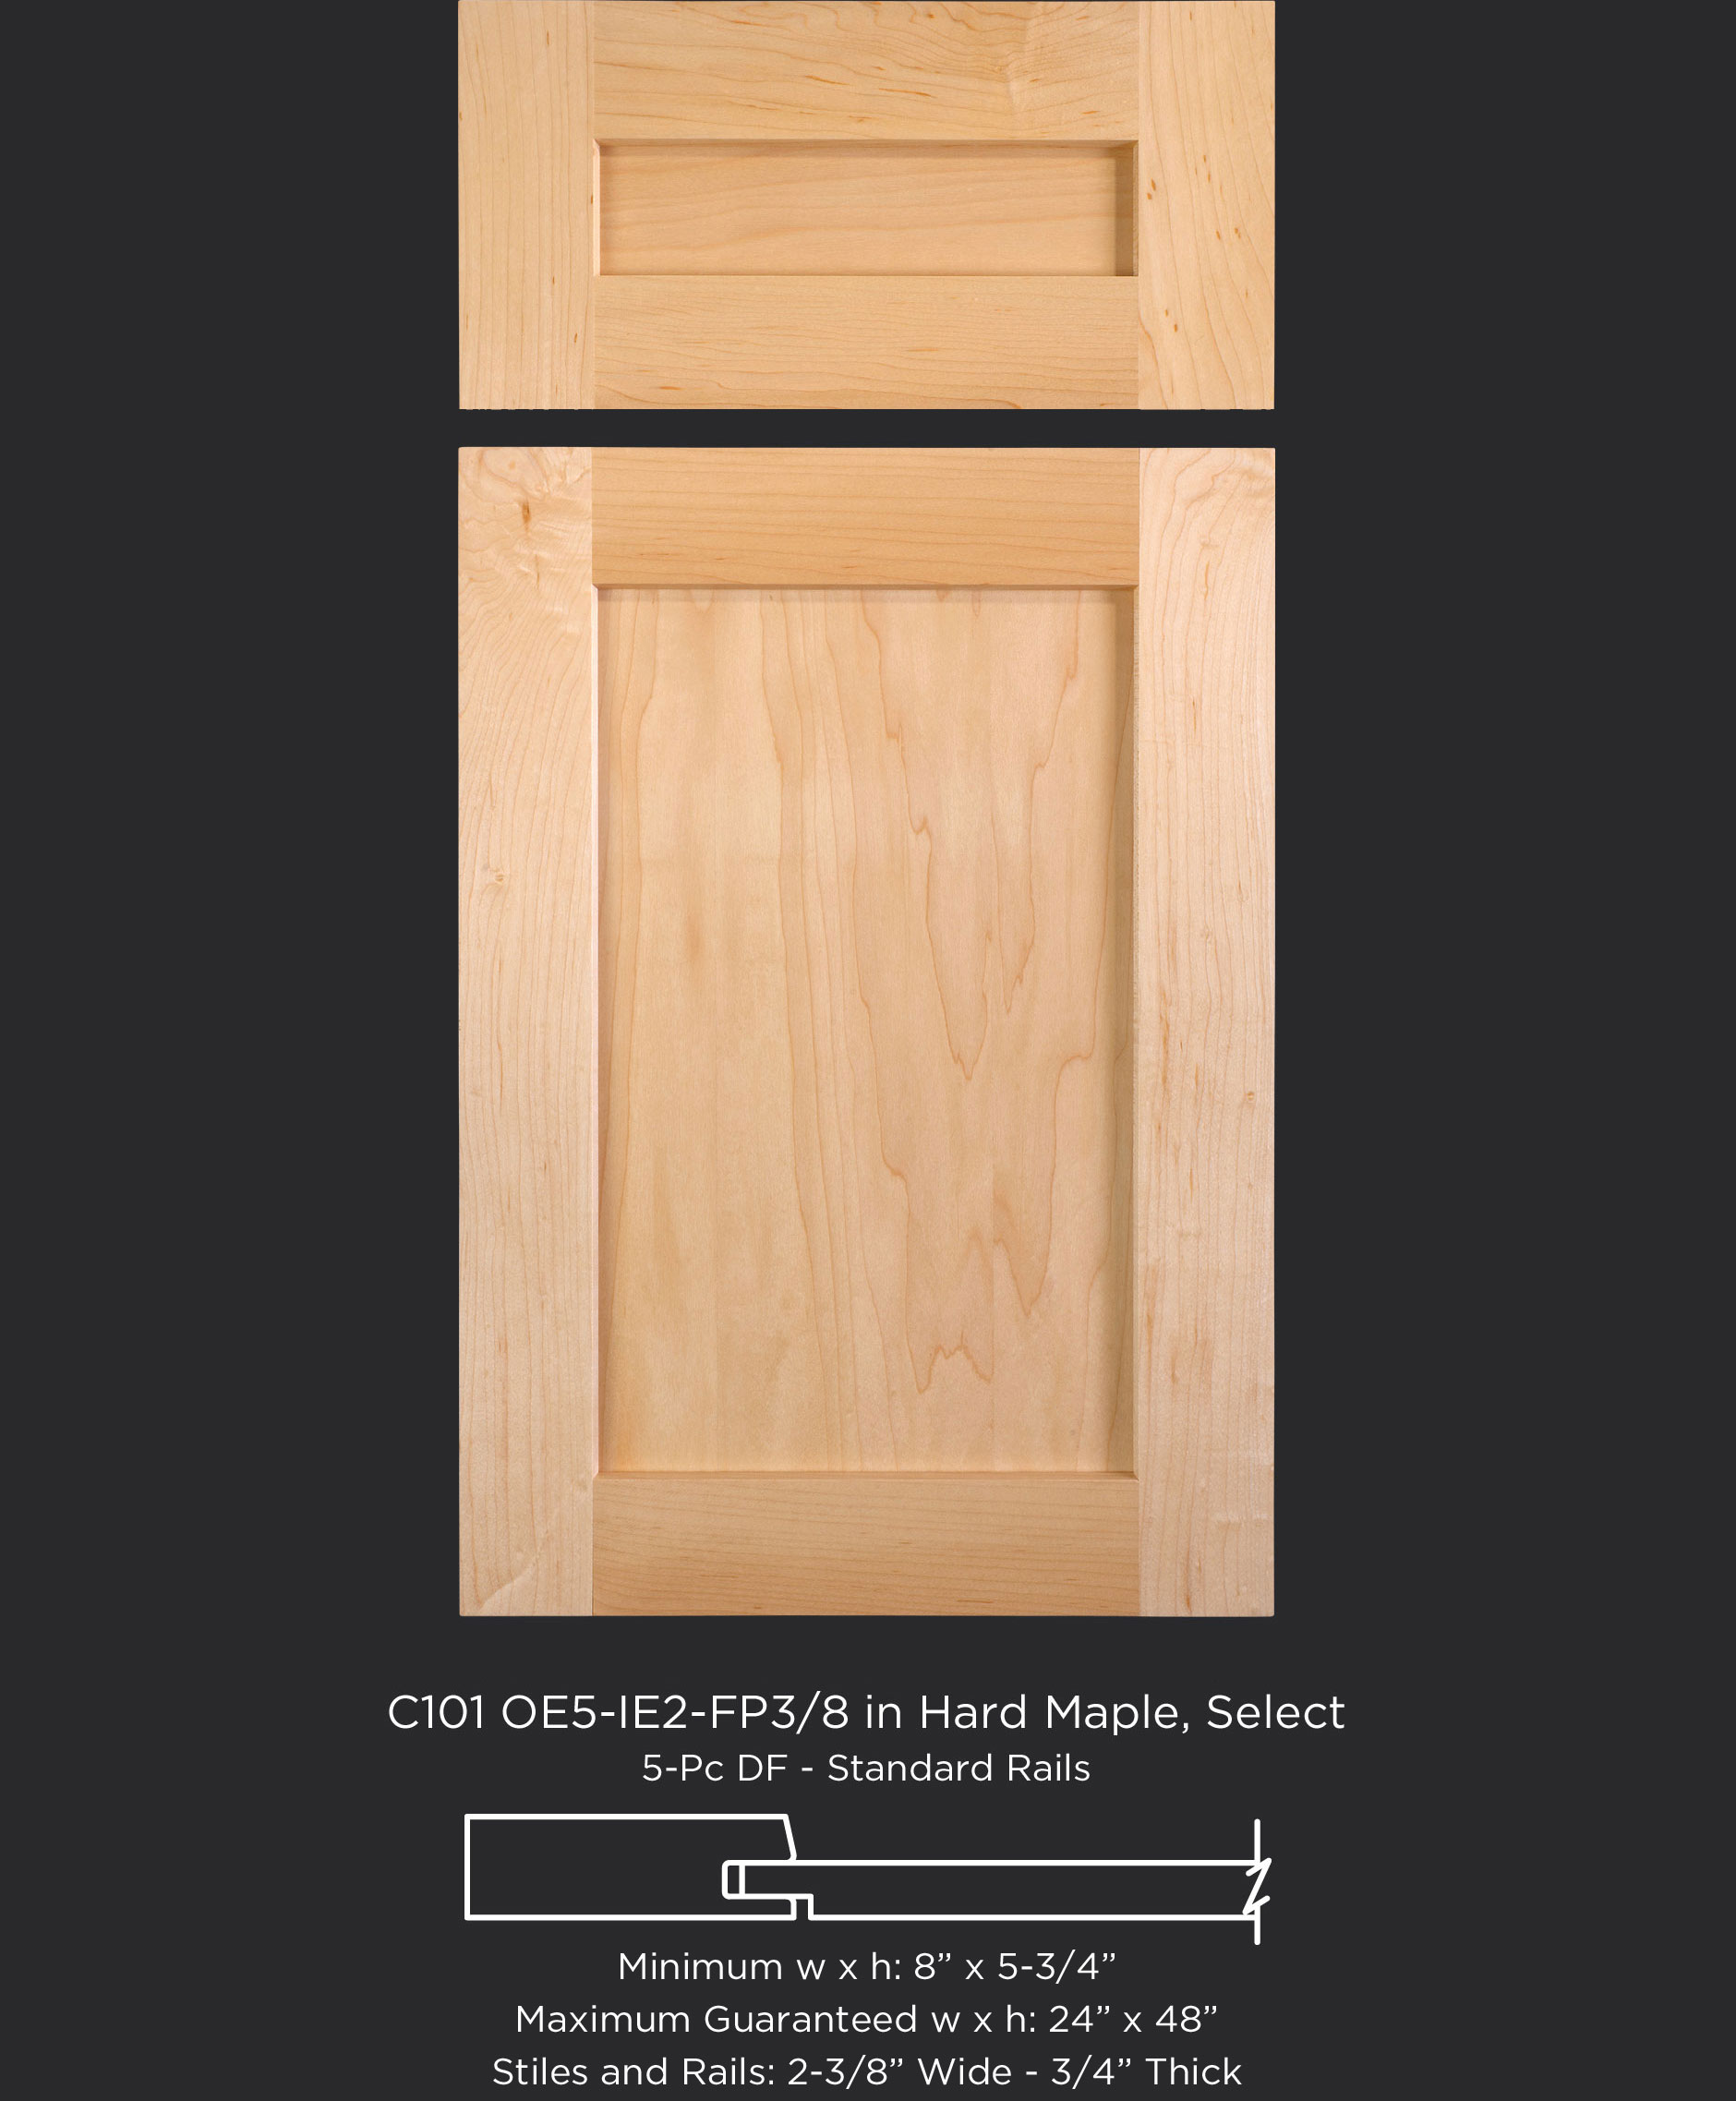 Cope and Stick Cabinet Door C101 OE5-IE2-FP3/8 in Hard Maple, Select and 5-piece drawer front